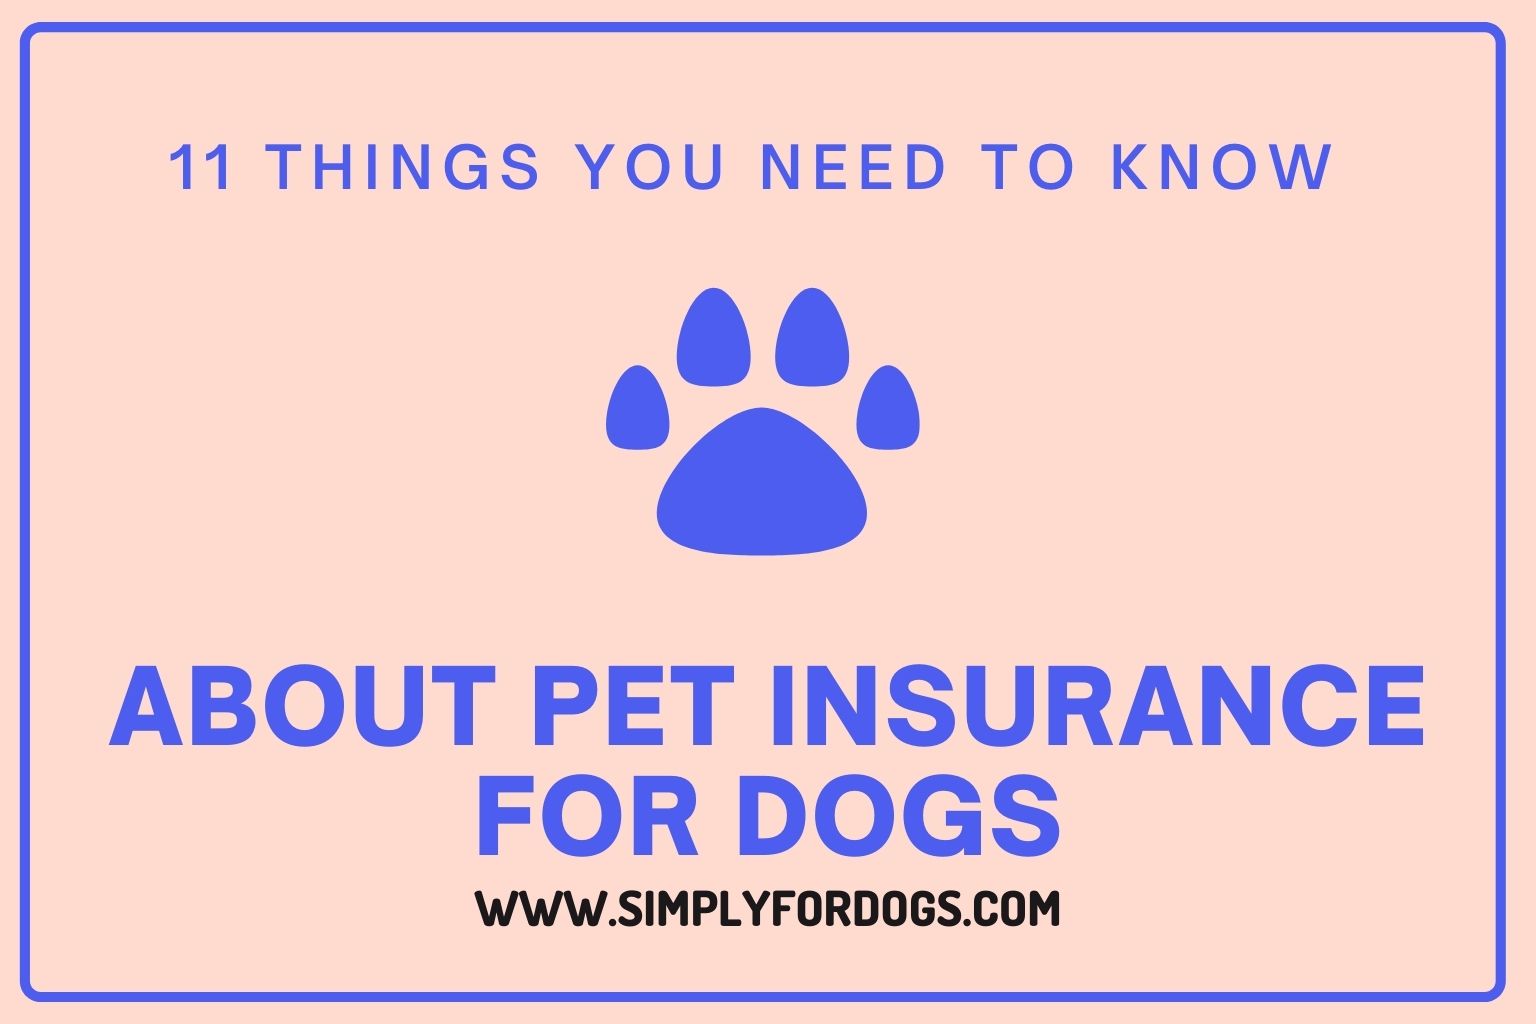 11 Things You Need to Know About Pet Insurance for Dogs